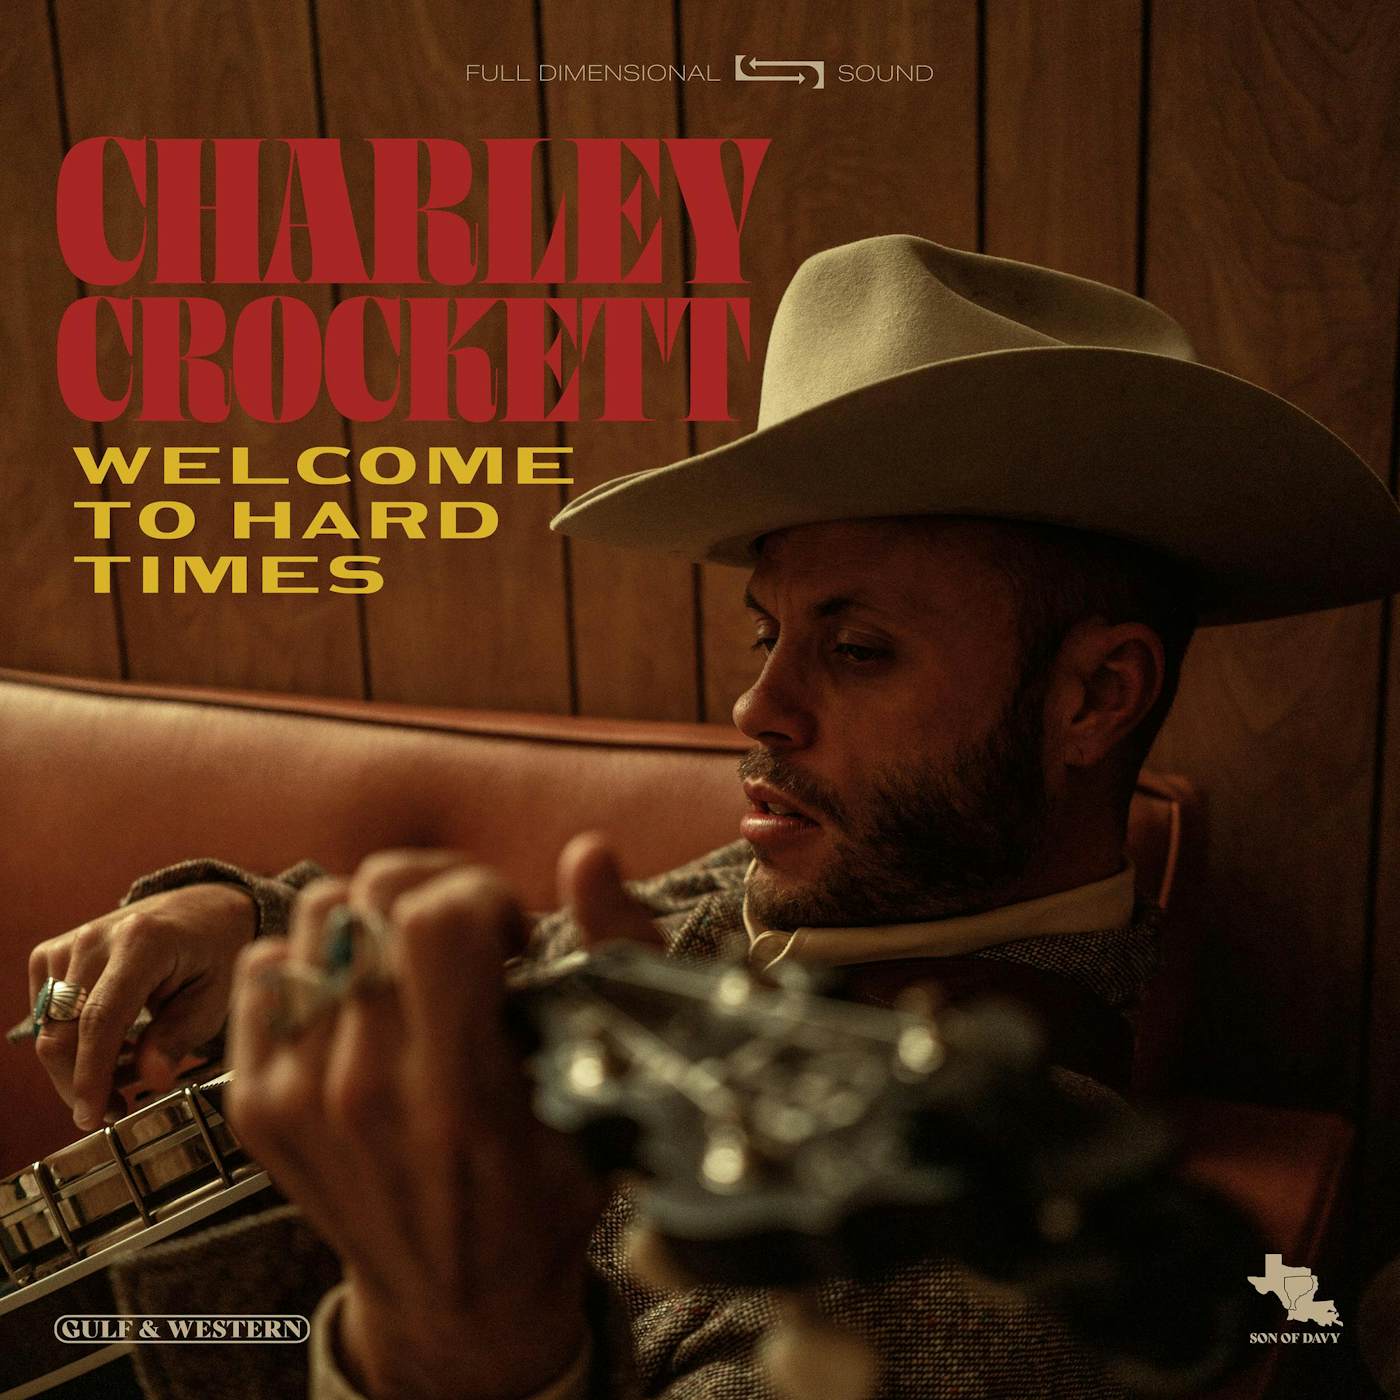 Charley Crockett Welcome to Hard Times Vinyl Record